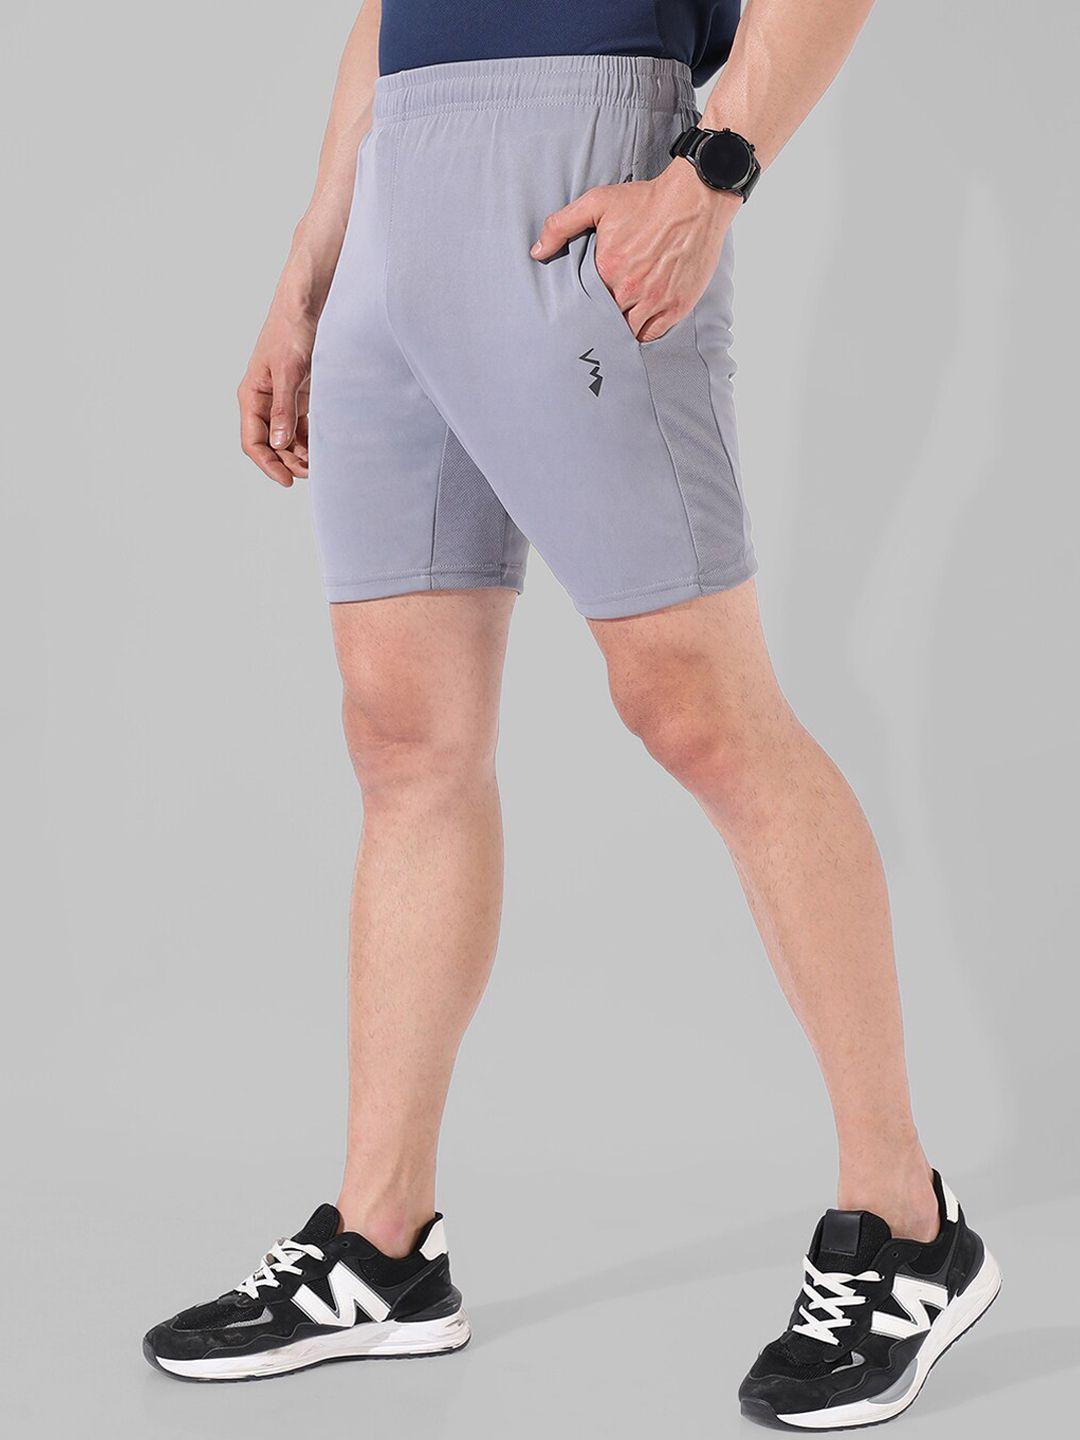 campus-sutra-men-mid-rise-outdoor-shorts